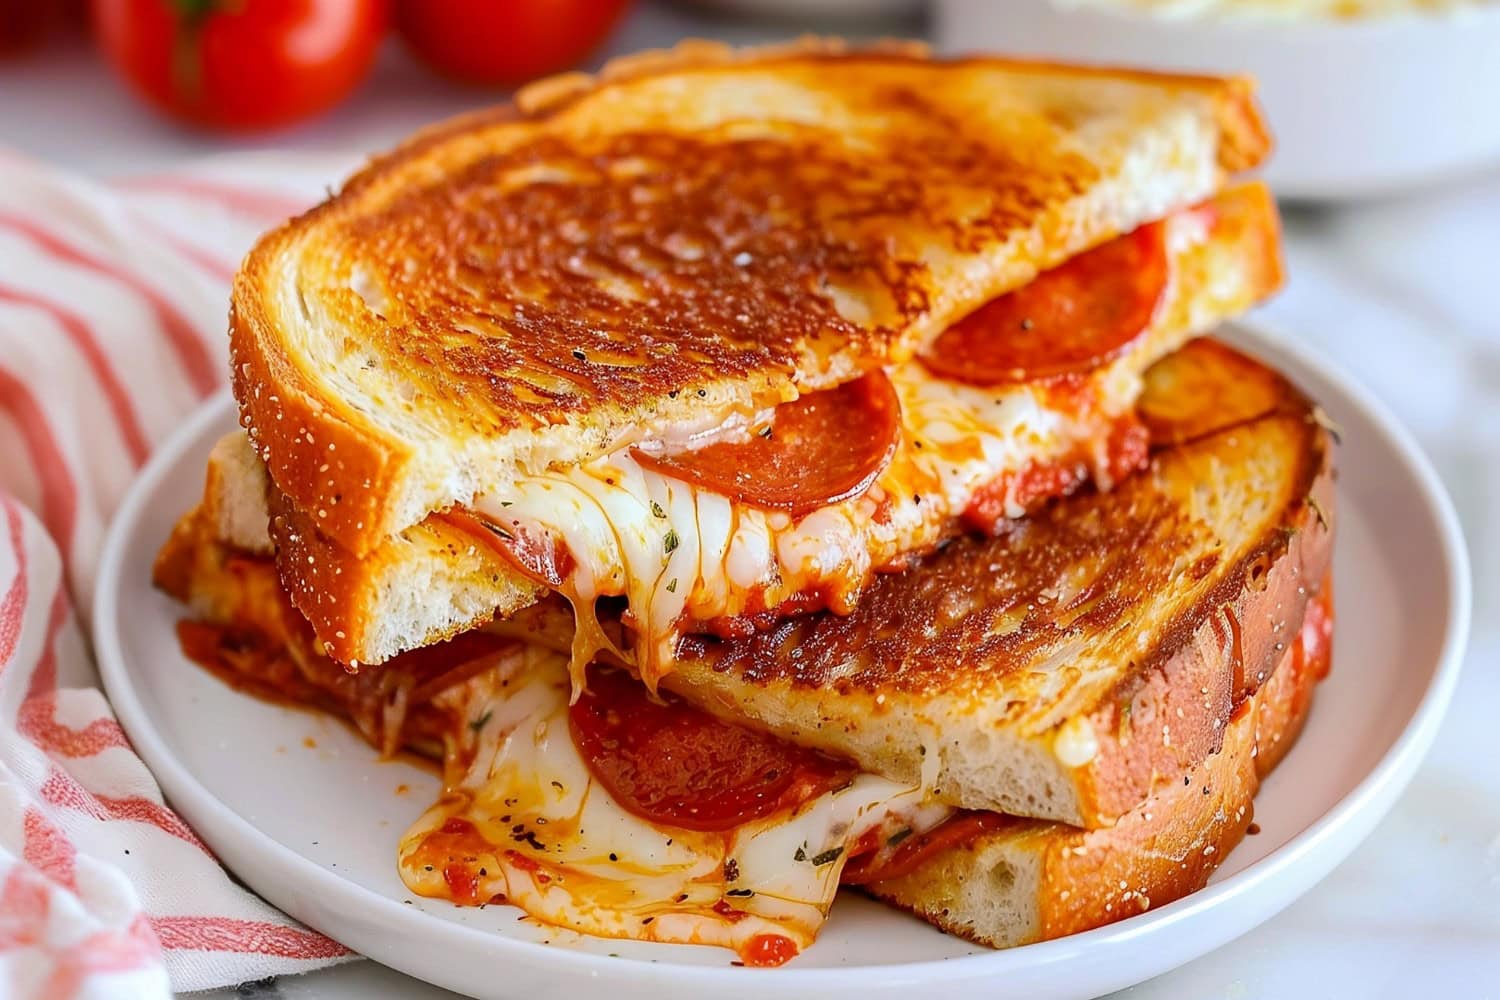 Hot and crispy pizza grilled cheese with pepperoni, mozzarella and marinara sauce